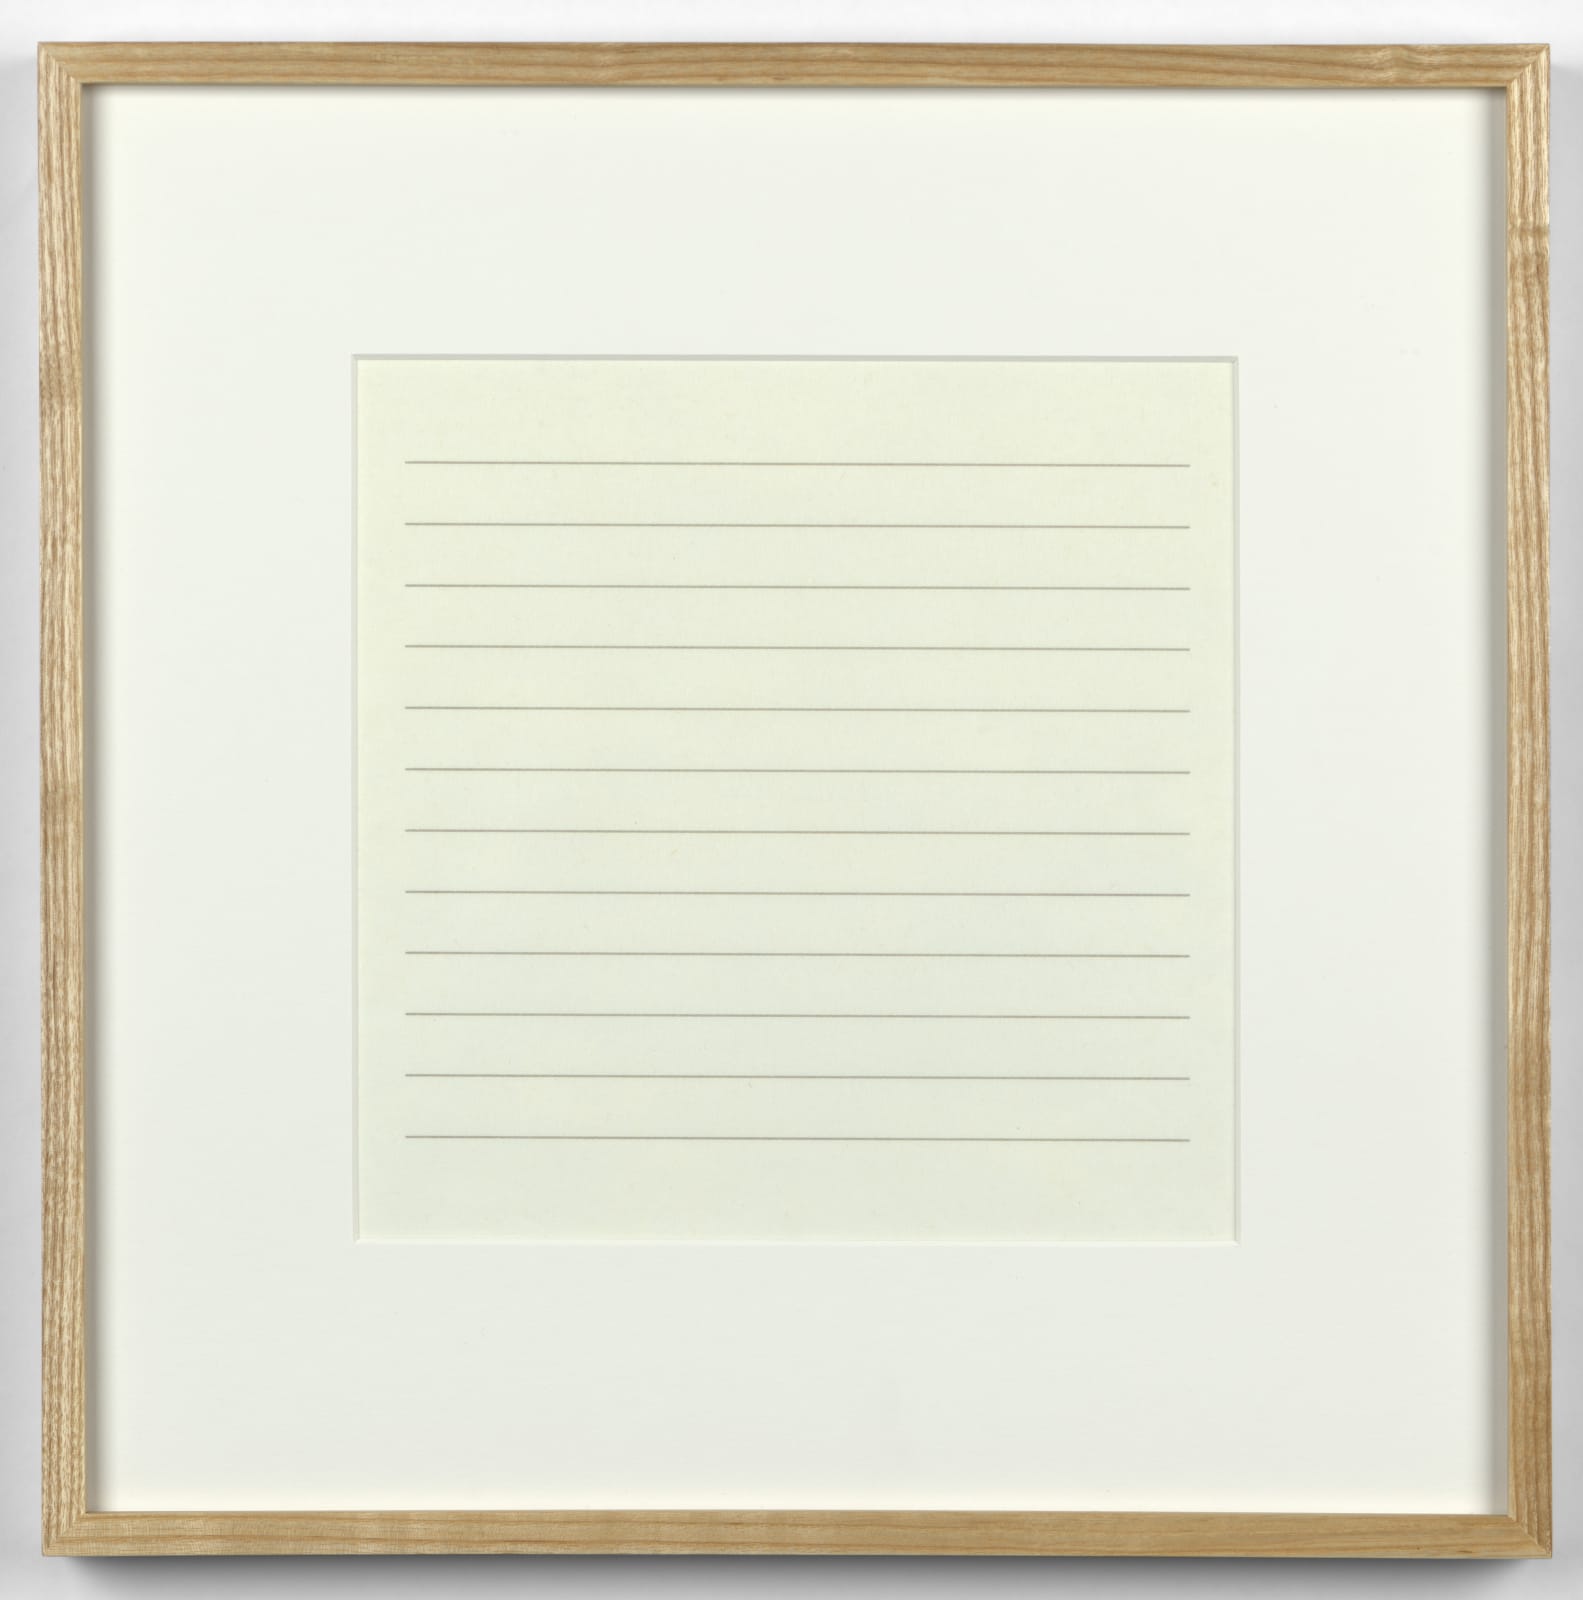 Agnes Martin, Untitled (On a Clear Day) #15, 1973